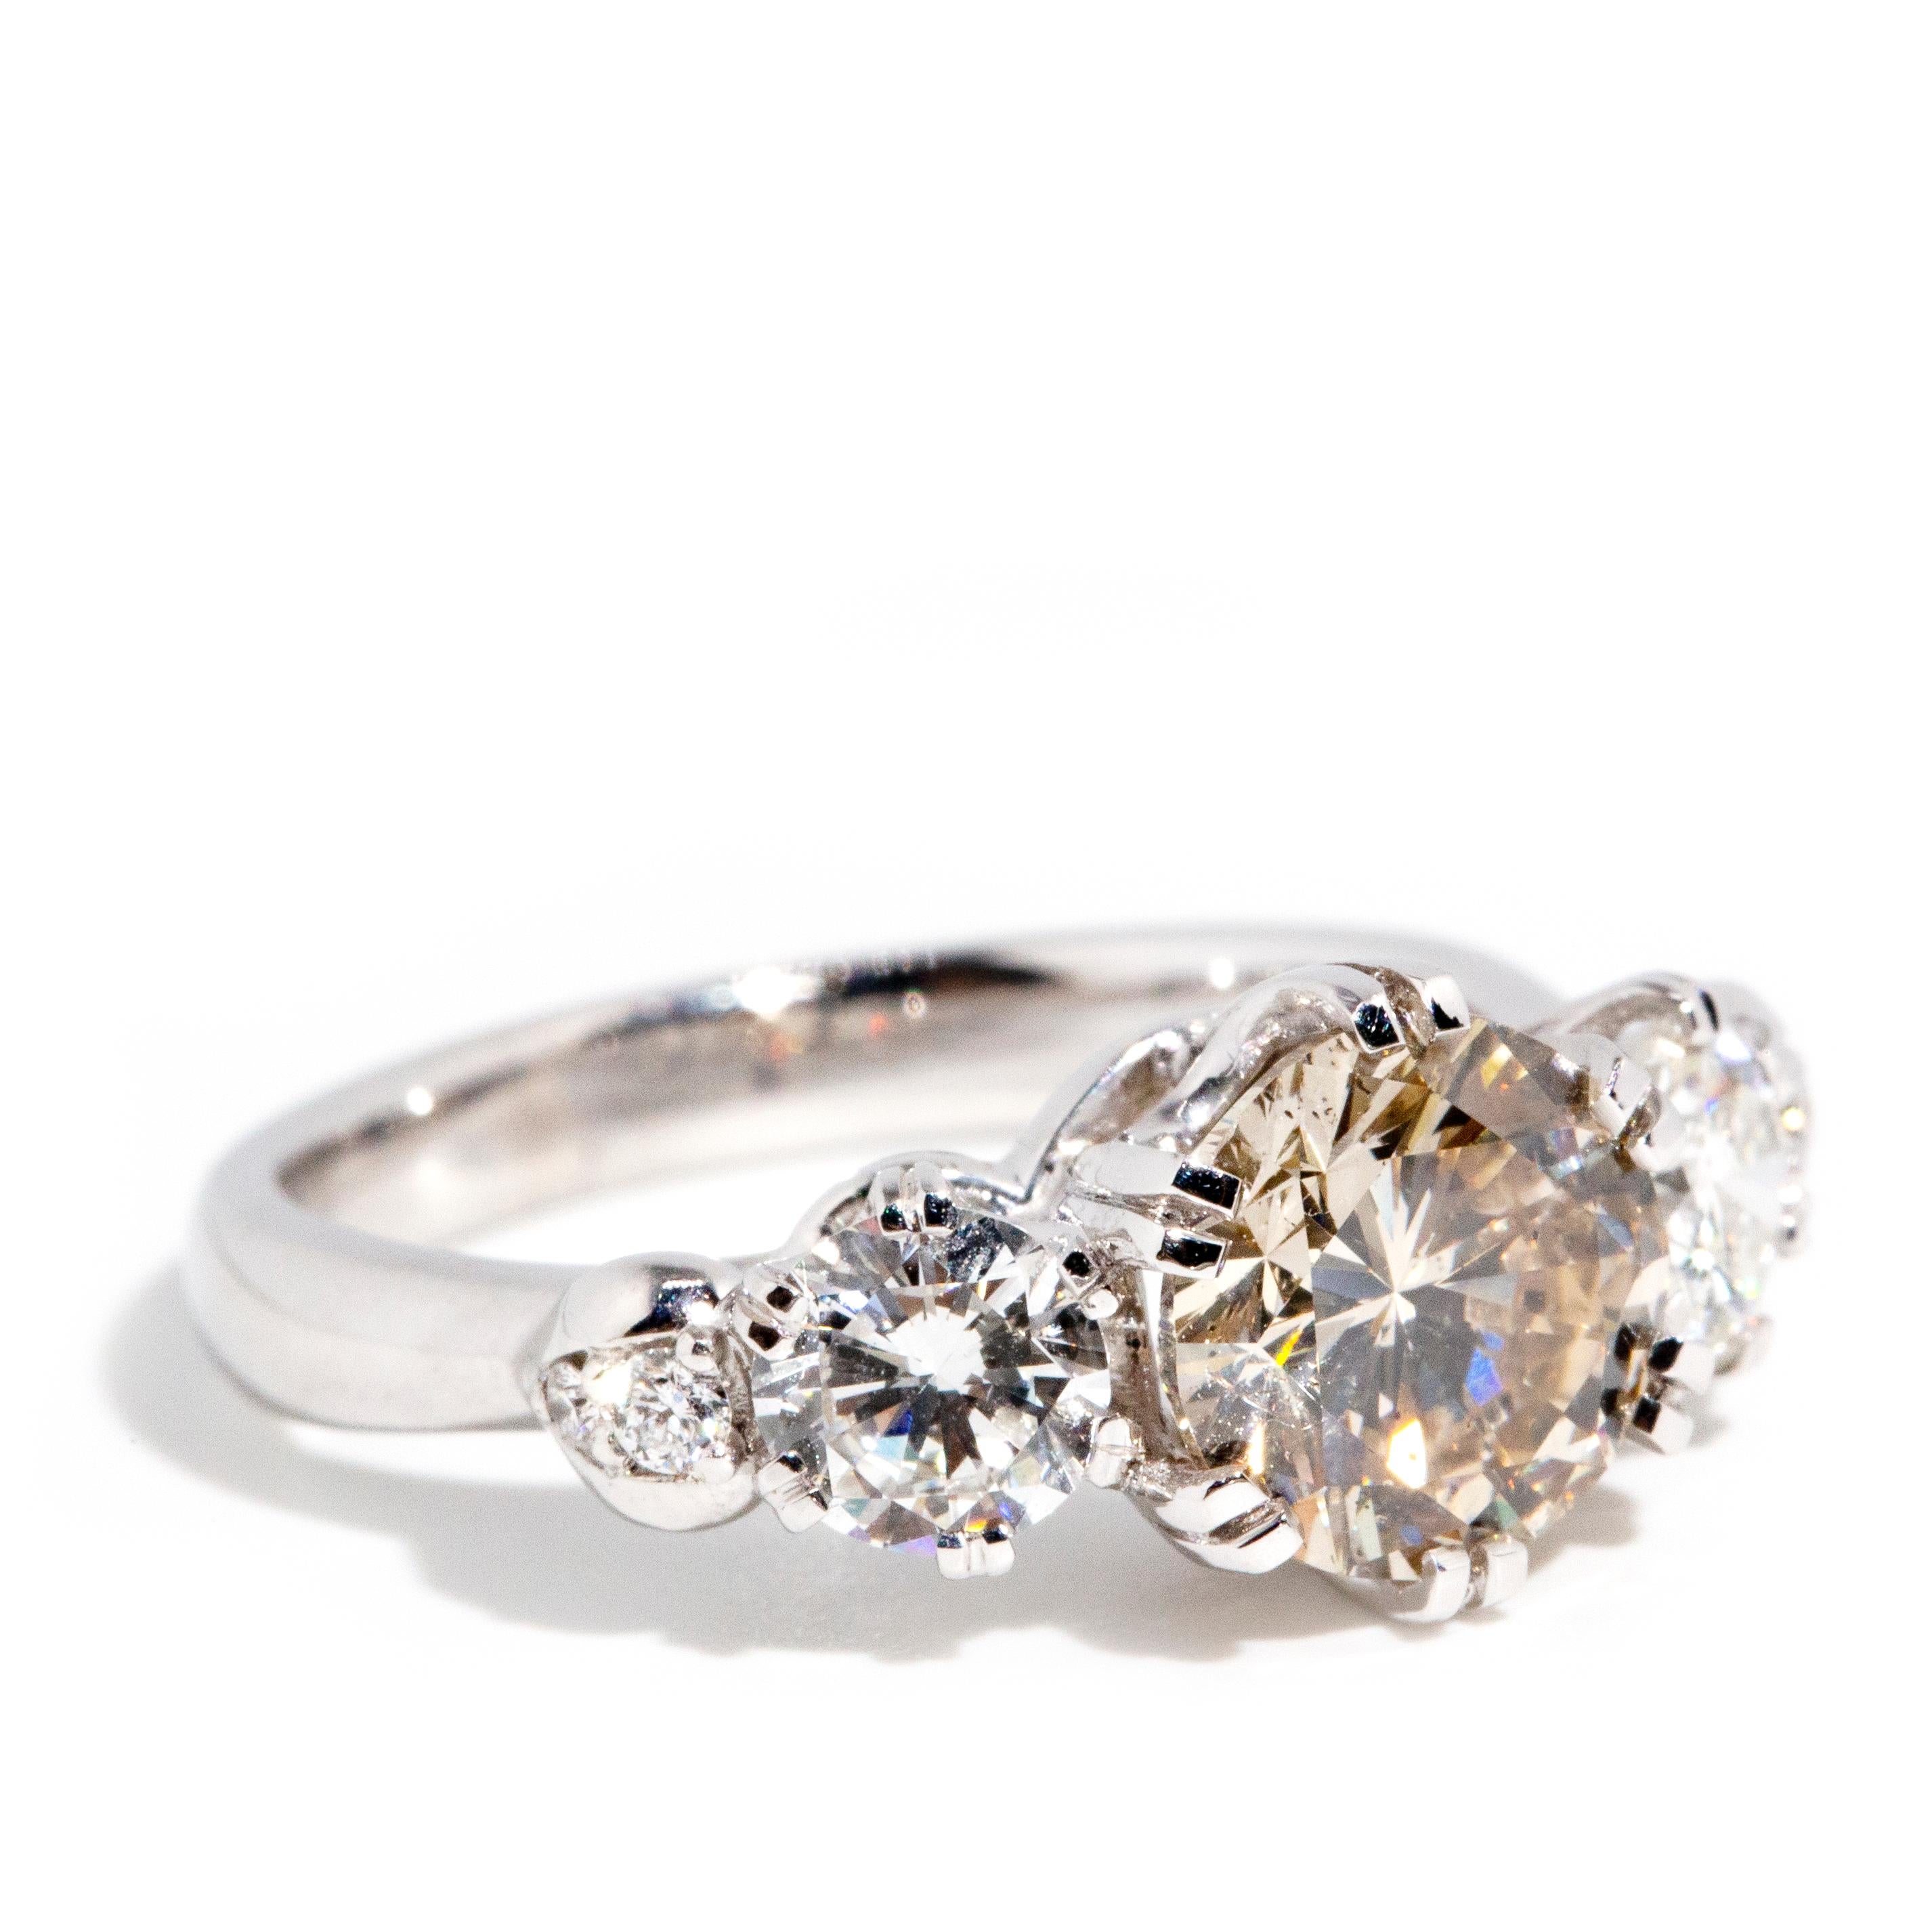 Forged in 18 carat white gold, this stunning contemporary ring features a stunning round brilliant diamond at the top of the band flanked by a fabulous duo of smaller round brilliant cut diamonds and additional diamonds around the setting. Her name